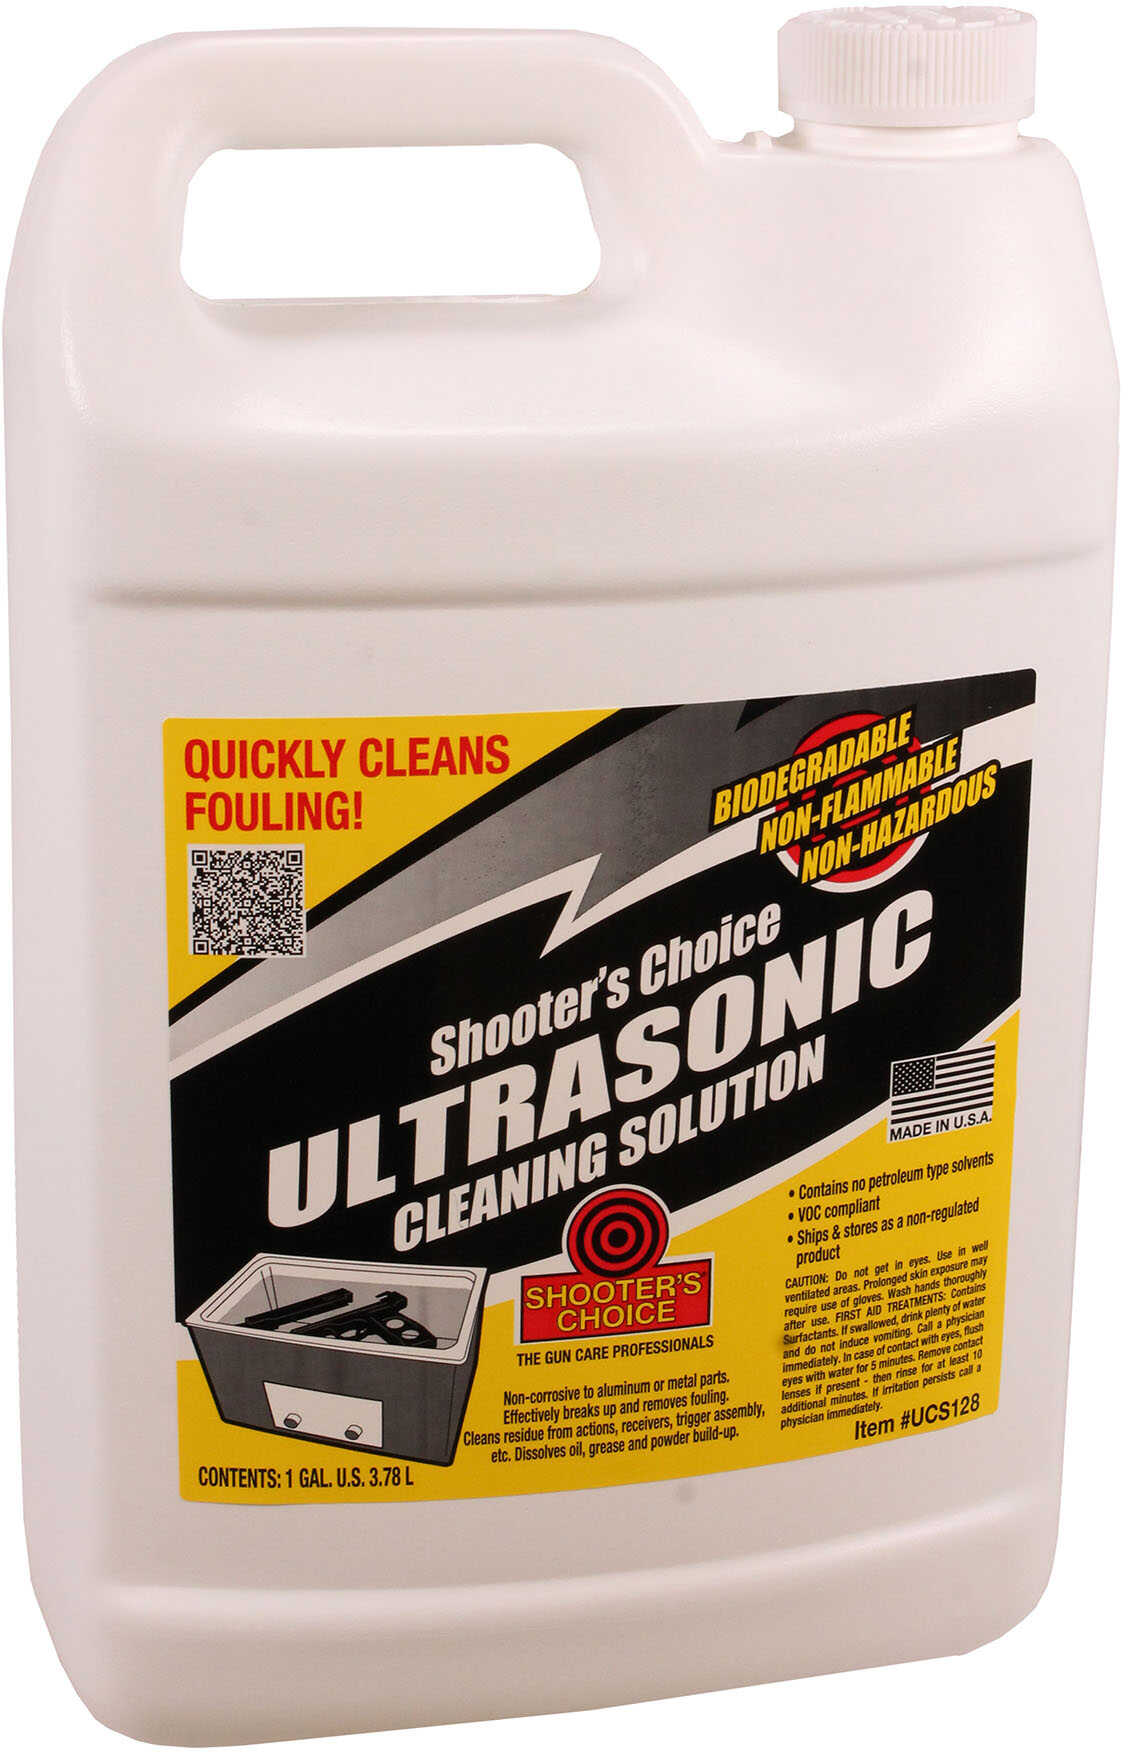 Shooters Choice Ultrasonic Cleaning Solution 1-Gallon